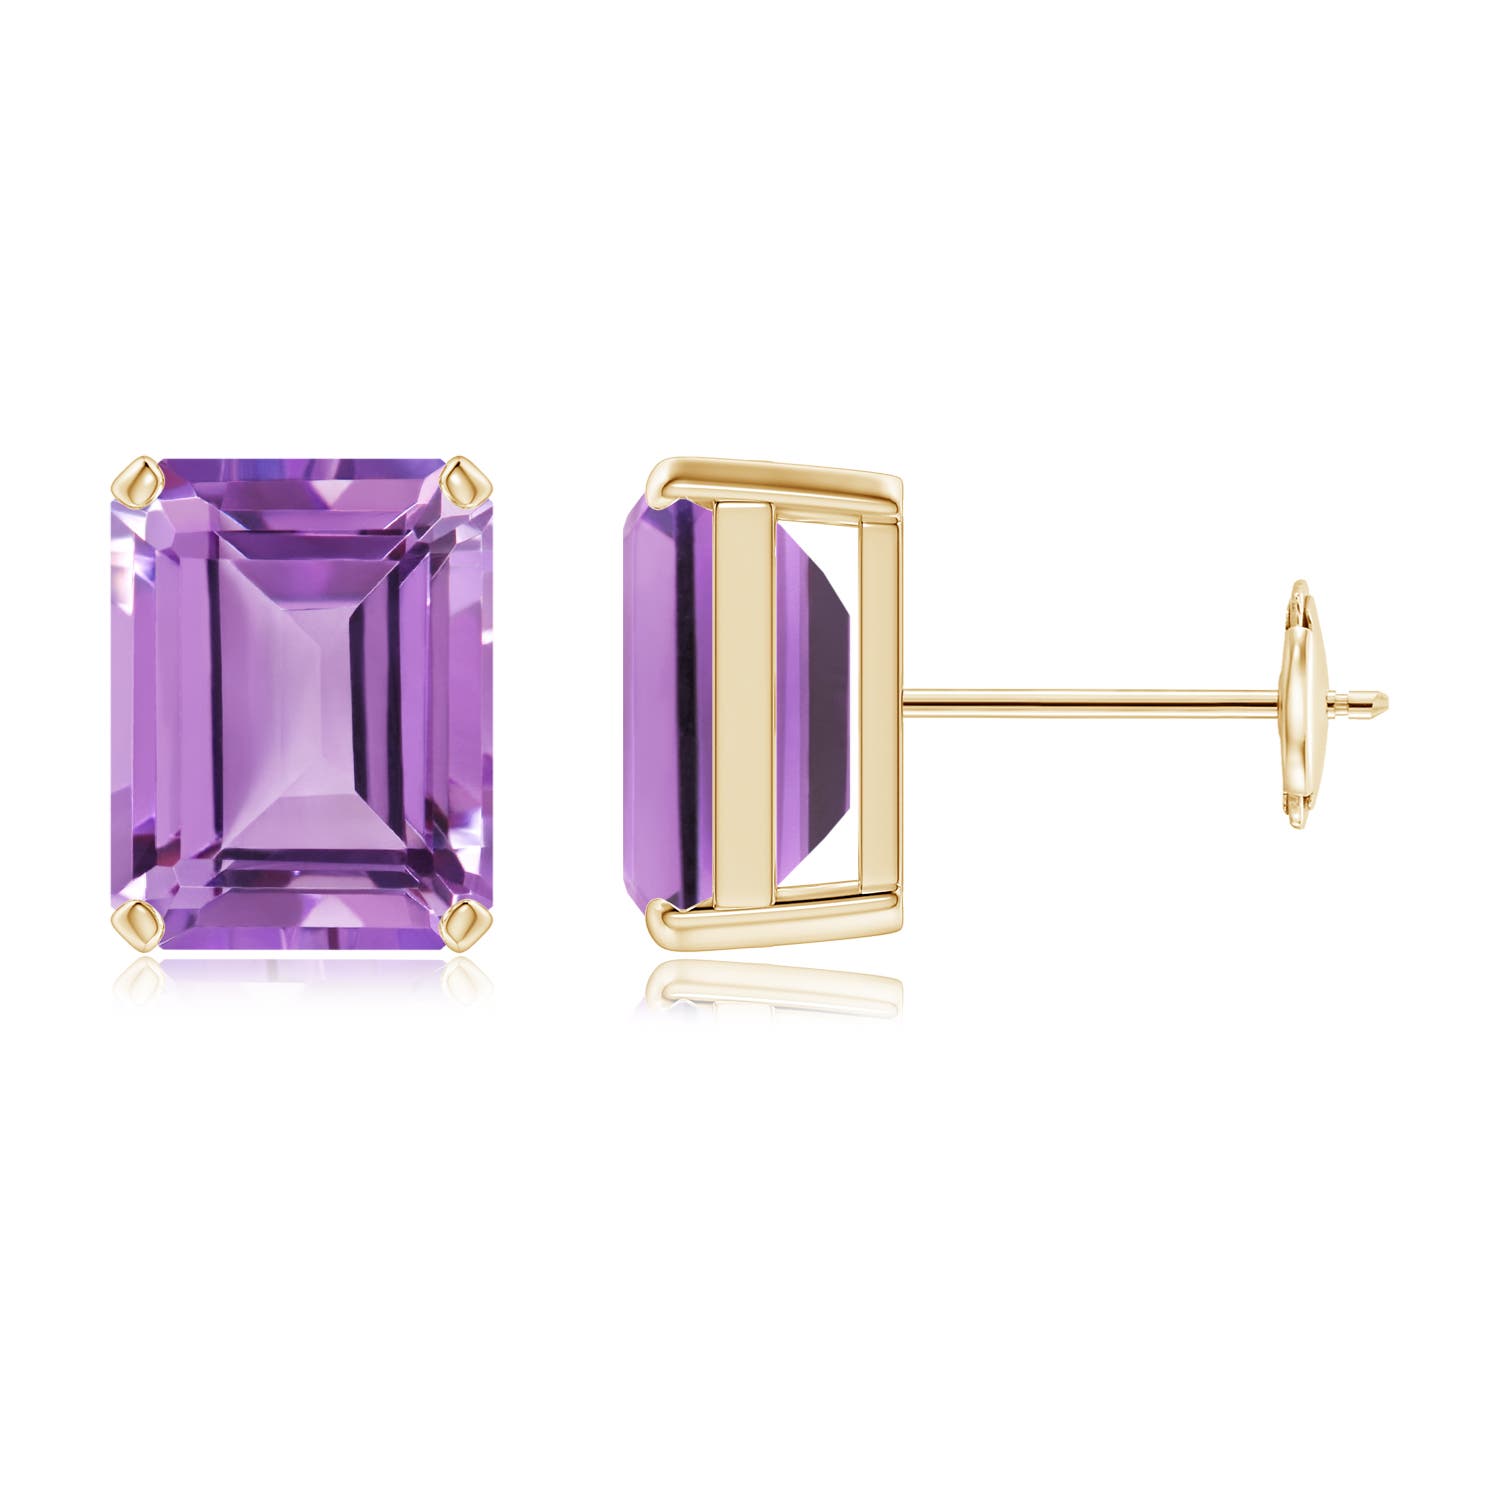 A - Amethyst / 4.4 CT / 14 KT Yellow Gold